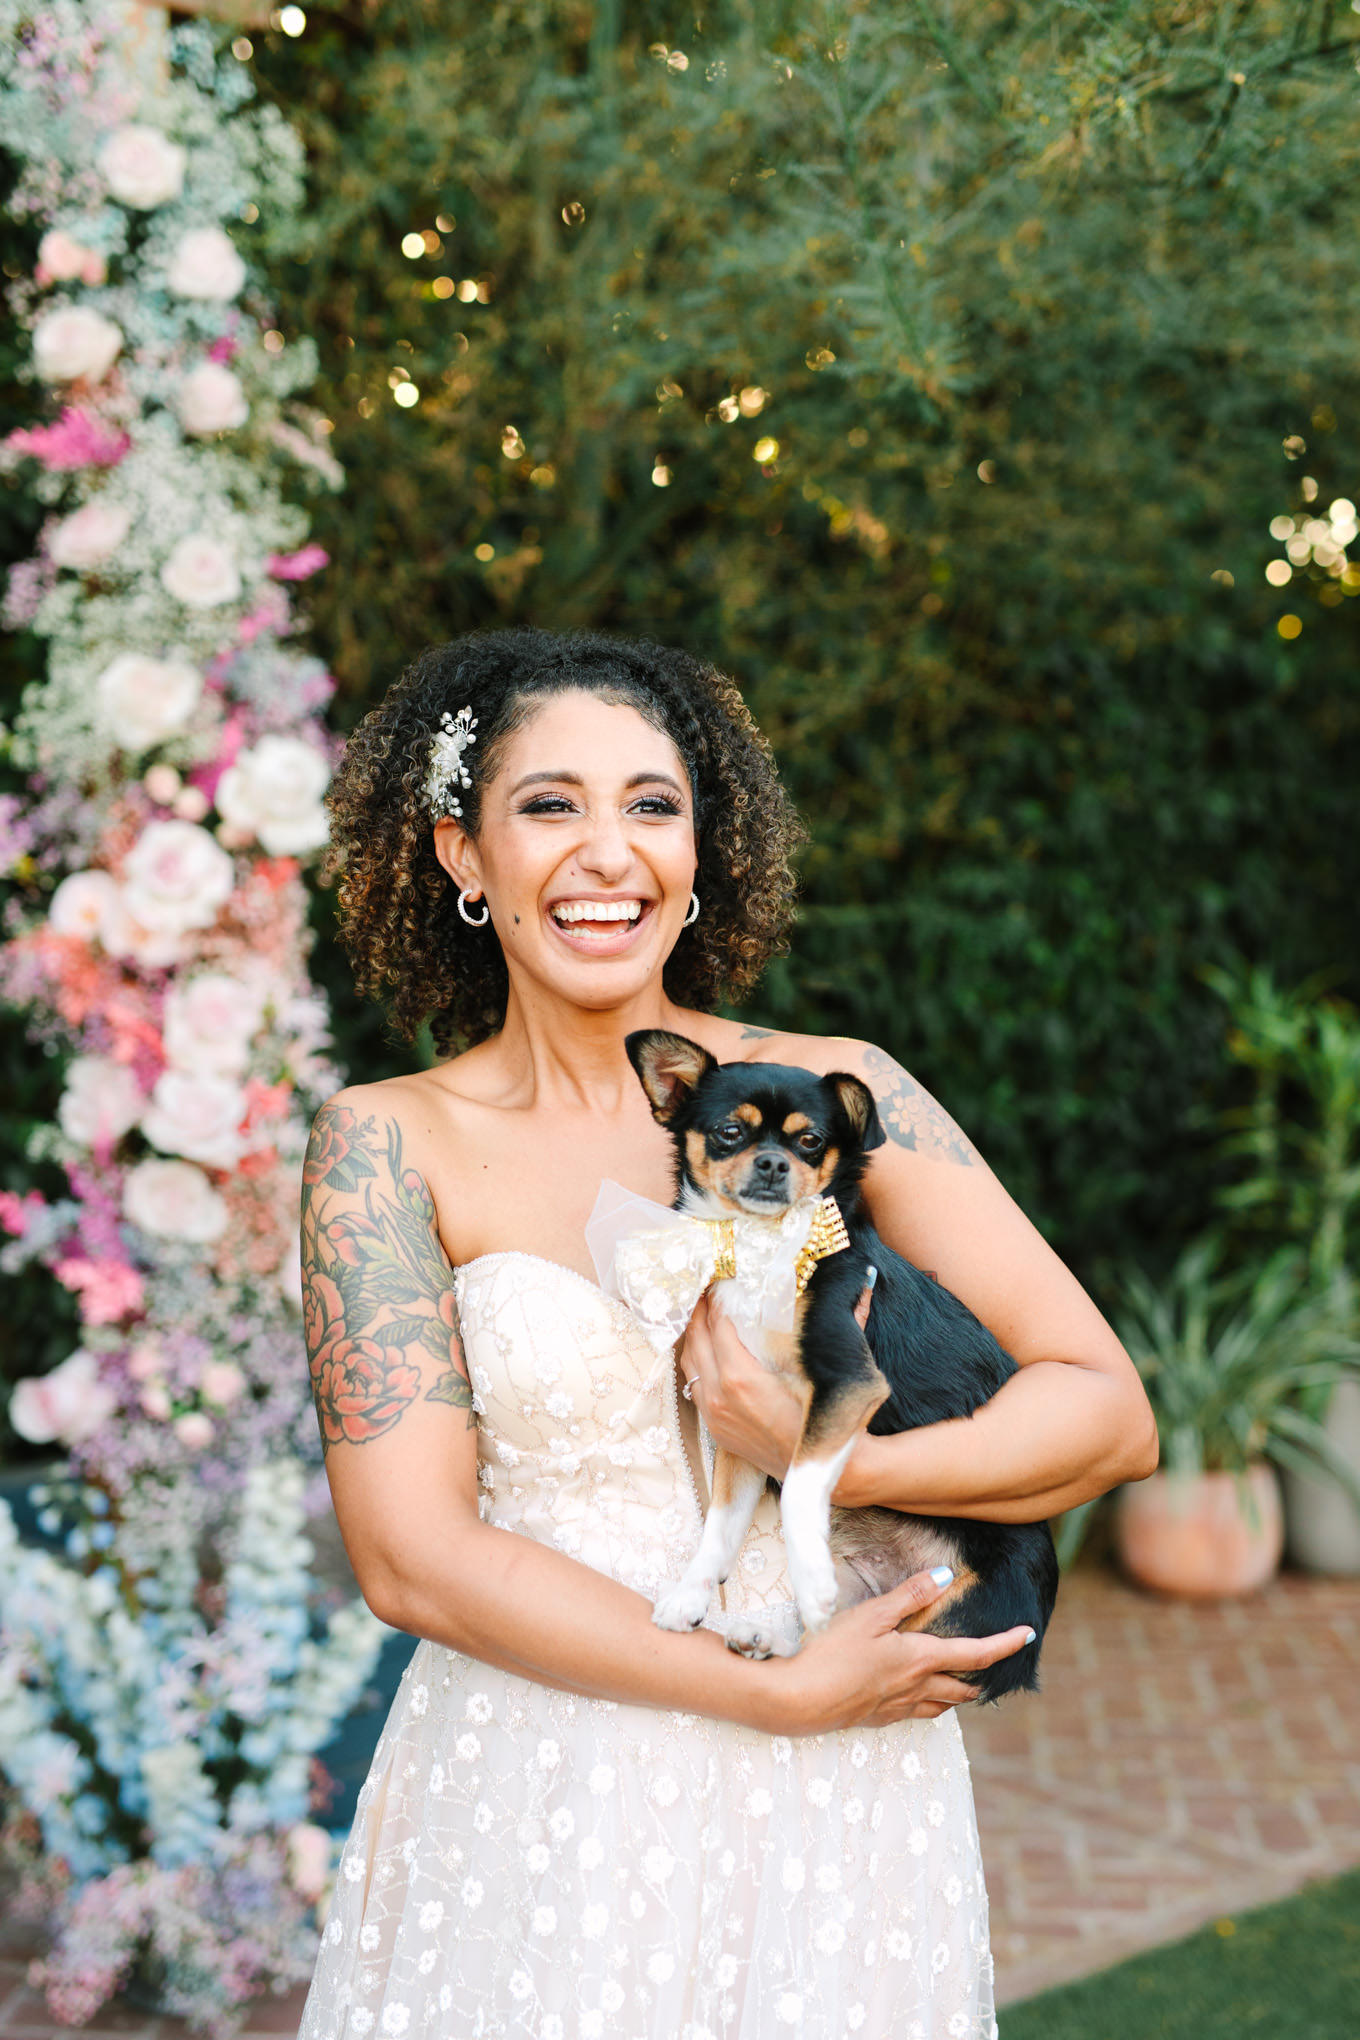 Bride with puppy | Colorful pop-up micro wedding at The Ruby Street Los Angeles featured on Green Wedding Shoes | Colorful and elevated photography for fun-loving couples in Southern California | #colorfulwedding #popupwedding #weddingphotography #microwedding Source: Mary Costa Photography | Los Angeles